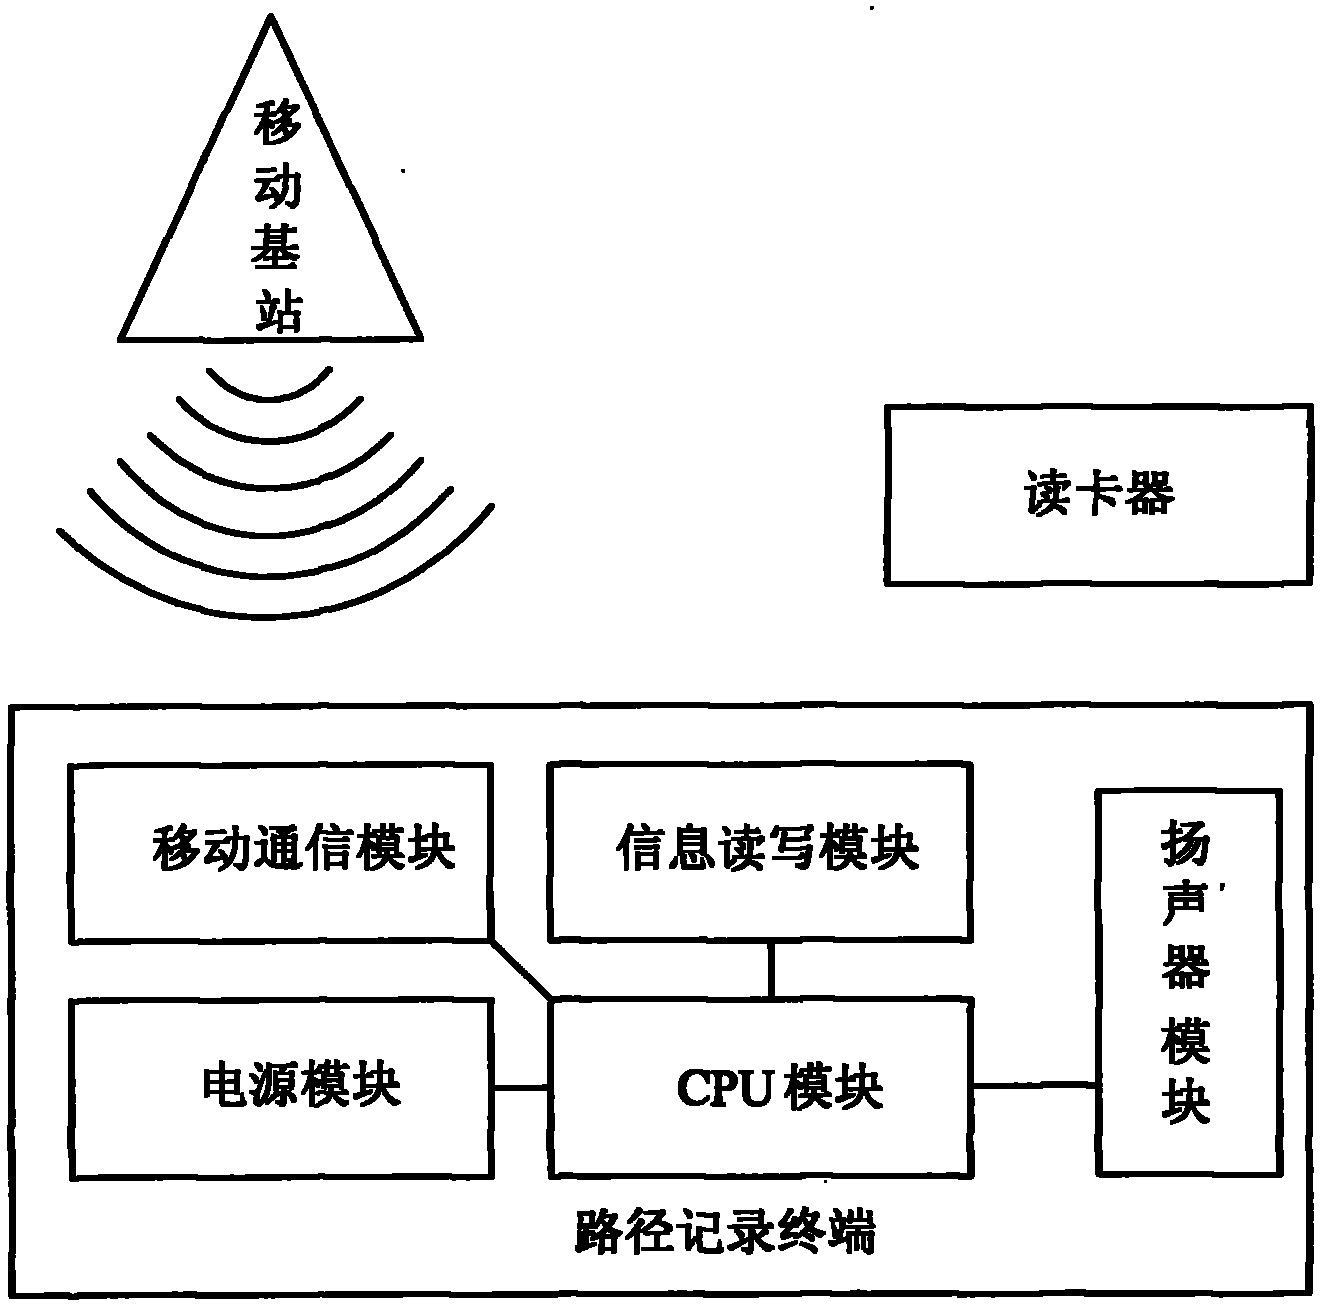 Recording system for driving route of vehicles on expressway based on mobile network and realizing method thereof